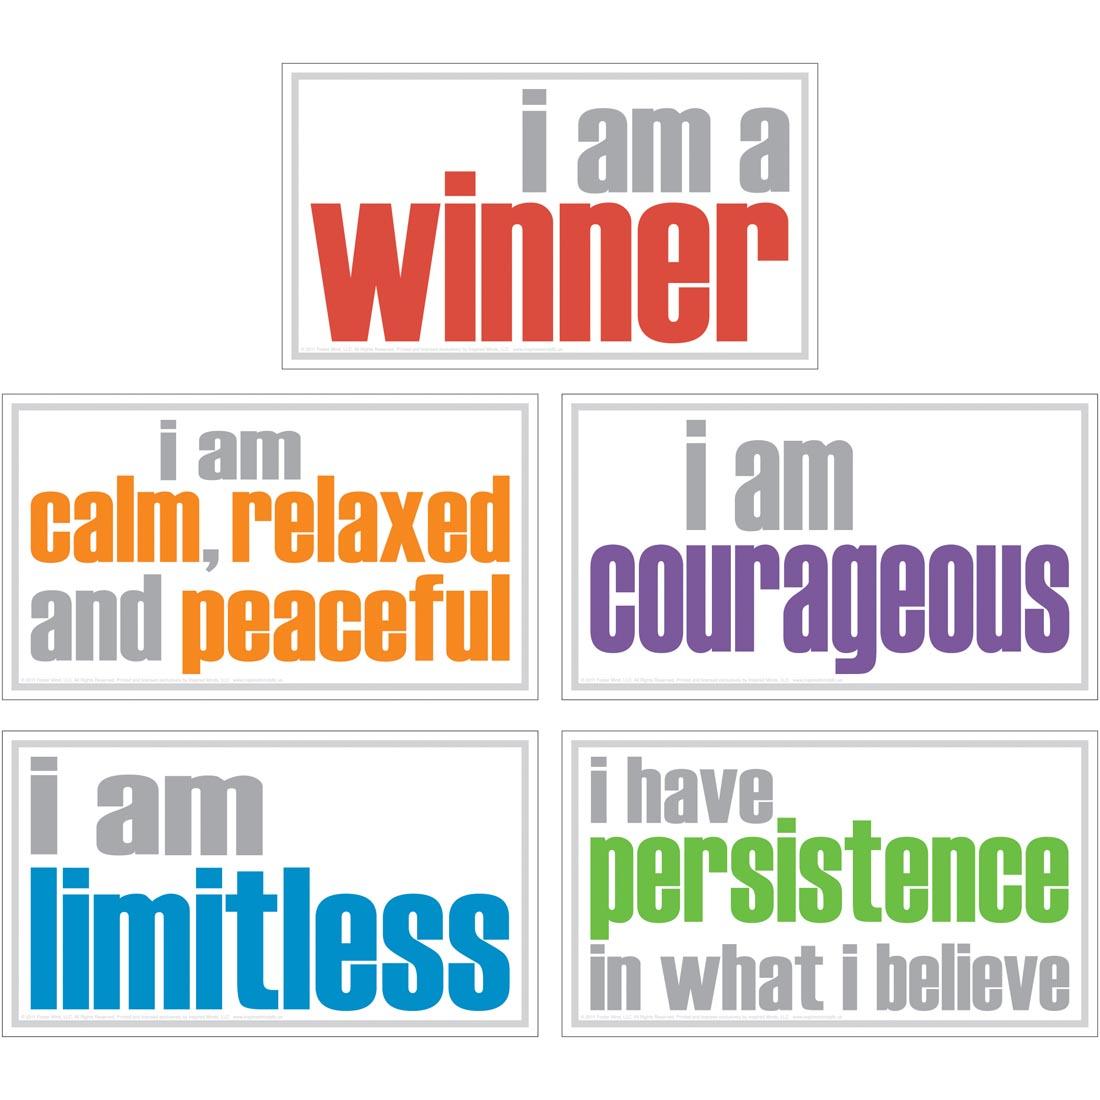 Inspired Minds Poster Set includes the messages I am a winner, I am calm, relaxed and peaceful, I am courageous, I am limitless, I have persistence in what I believe